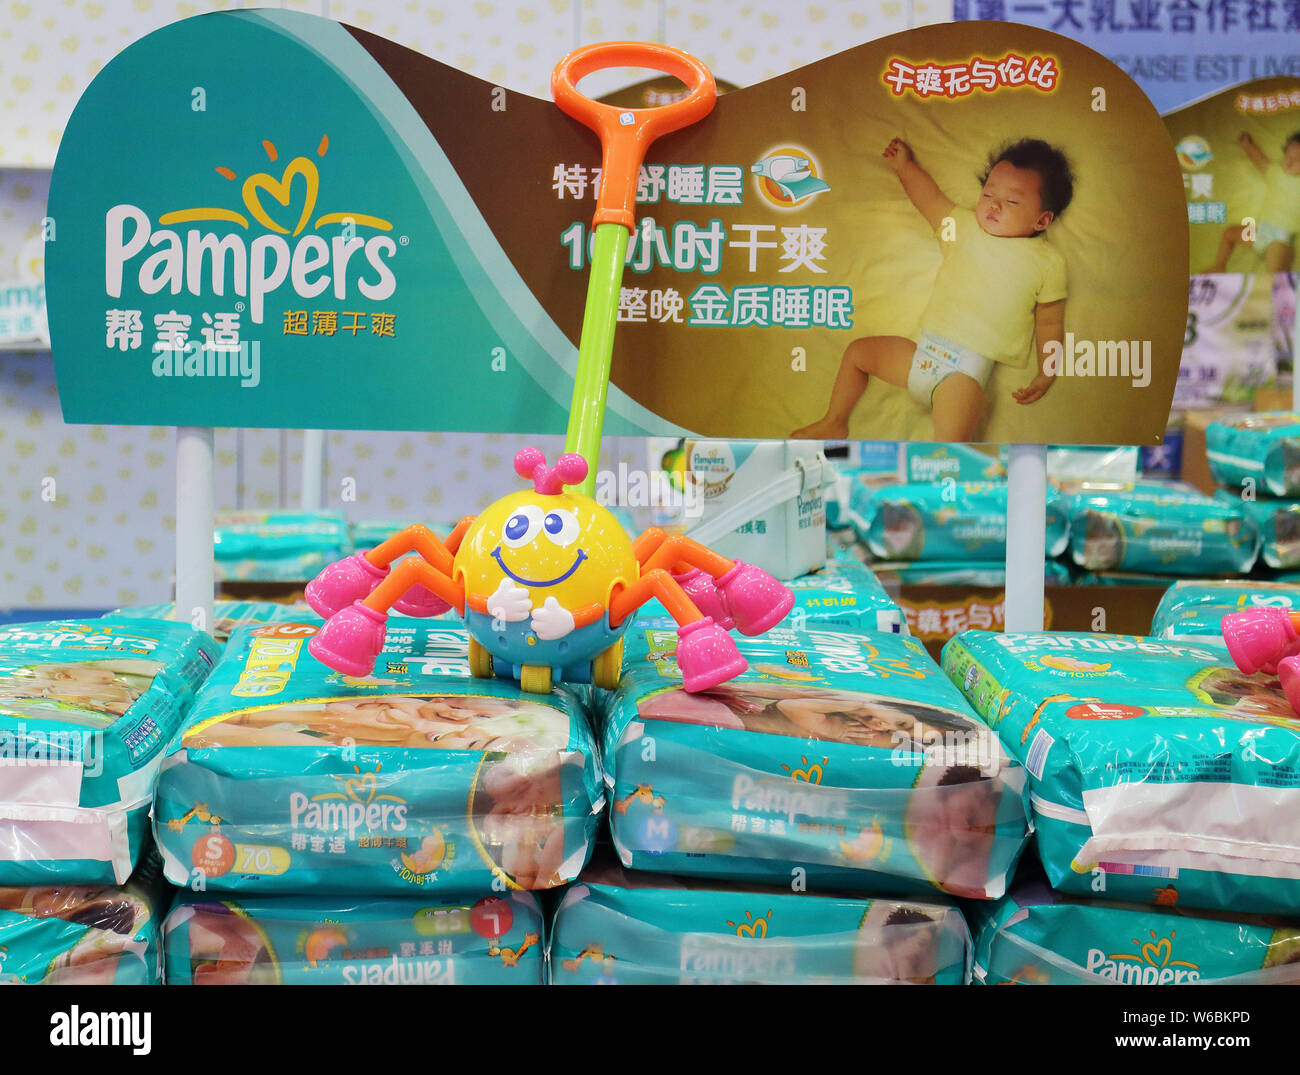 FILE--Bags of Pampers infant diapers of Procter & Gamble (P&G) are  displayed during an exhibition in Fuzhou city, southeast China's Fujian  province Stock Photo - Alamy